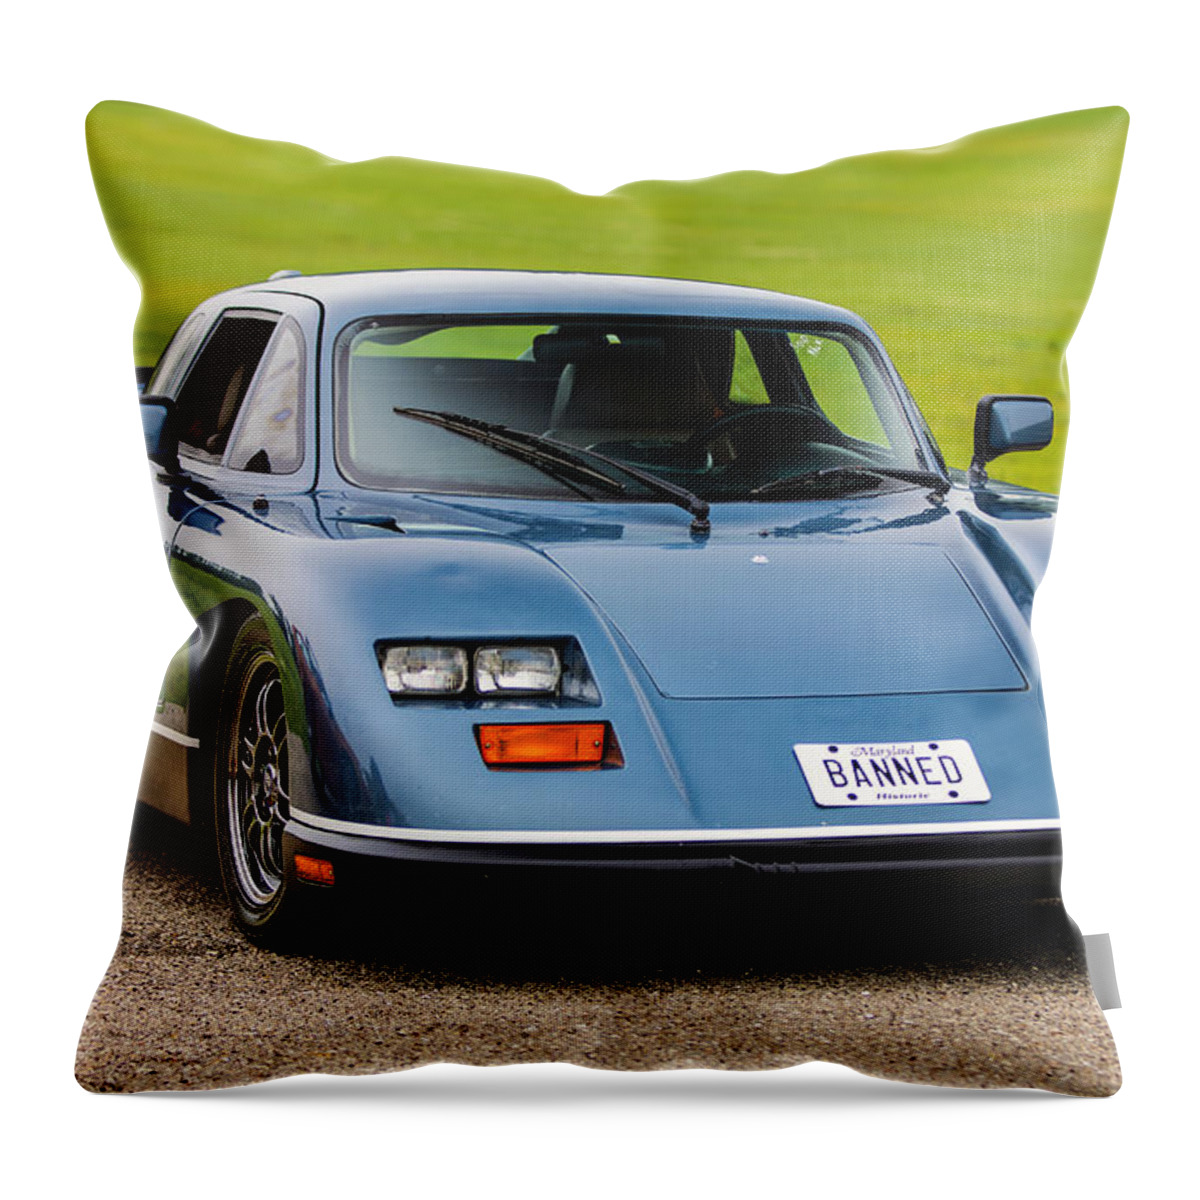 Consulier Gtp Throw Pillow featuring the photograph Car Show 009 by Josh Bryant